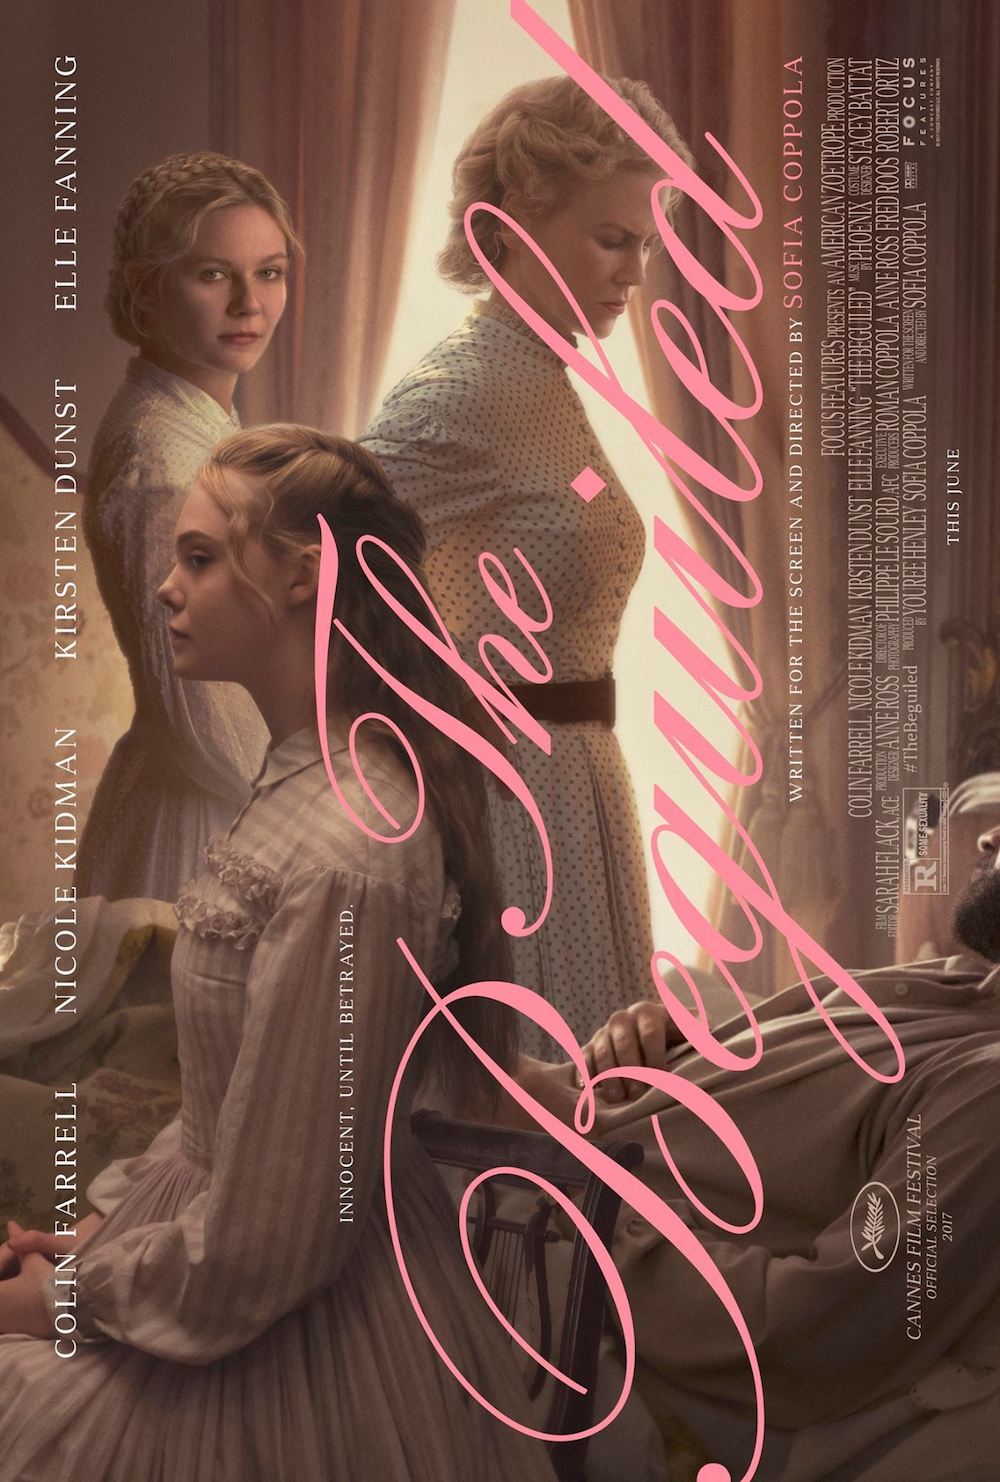 Poster for “The Beguiled”